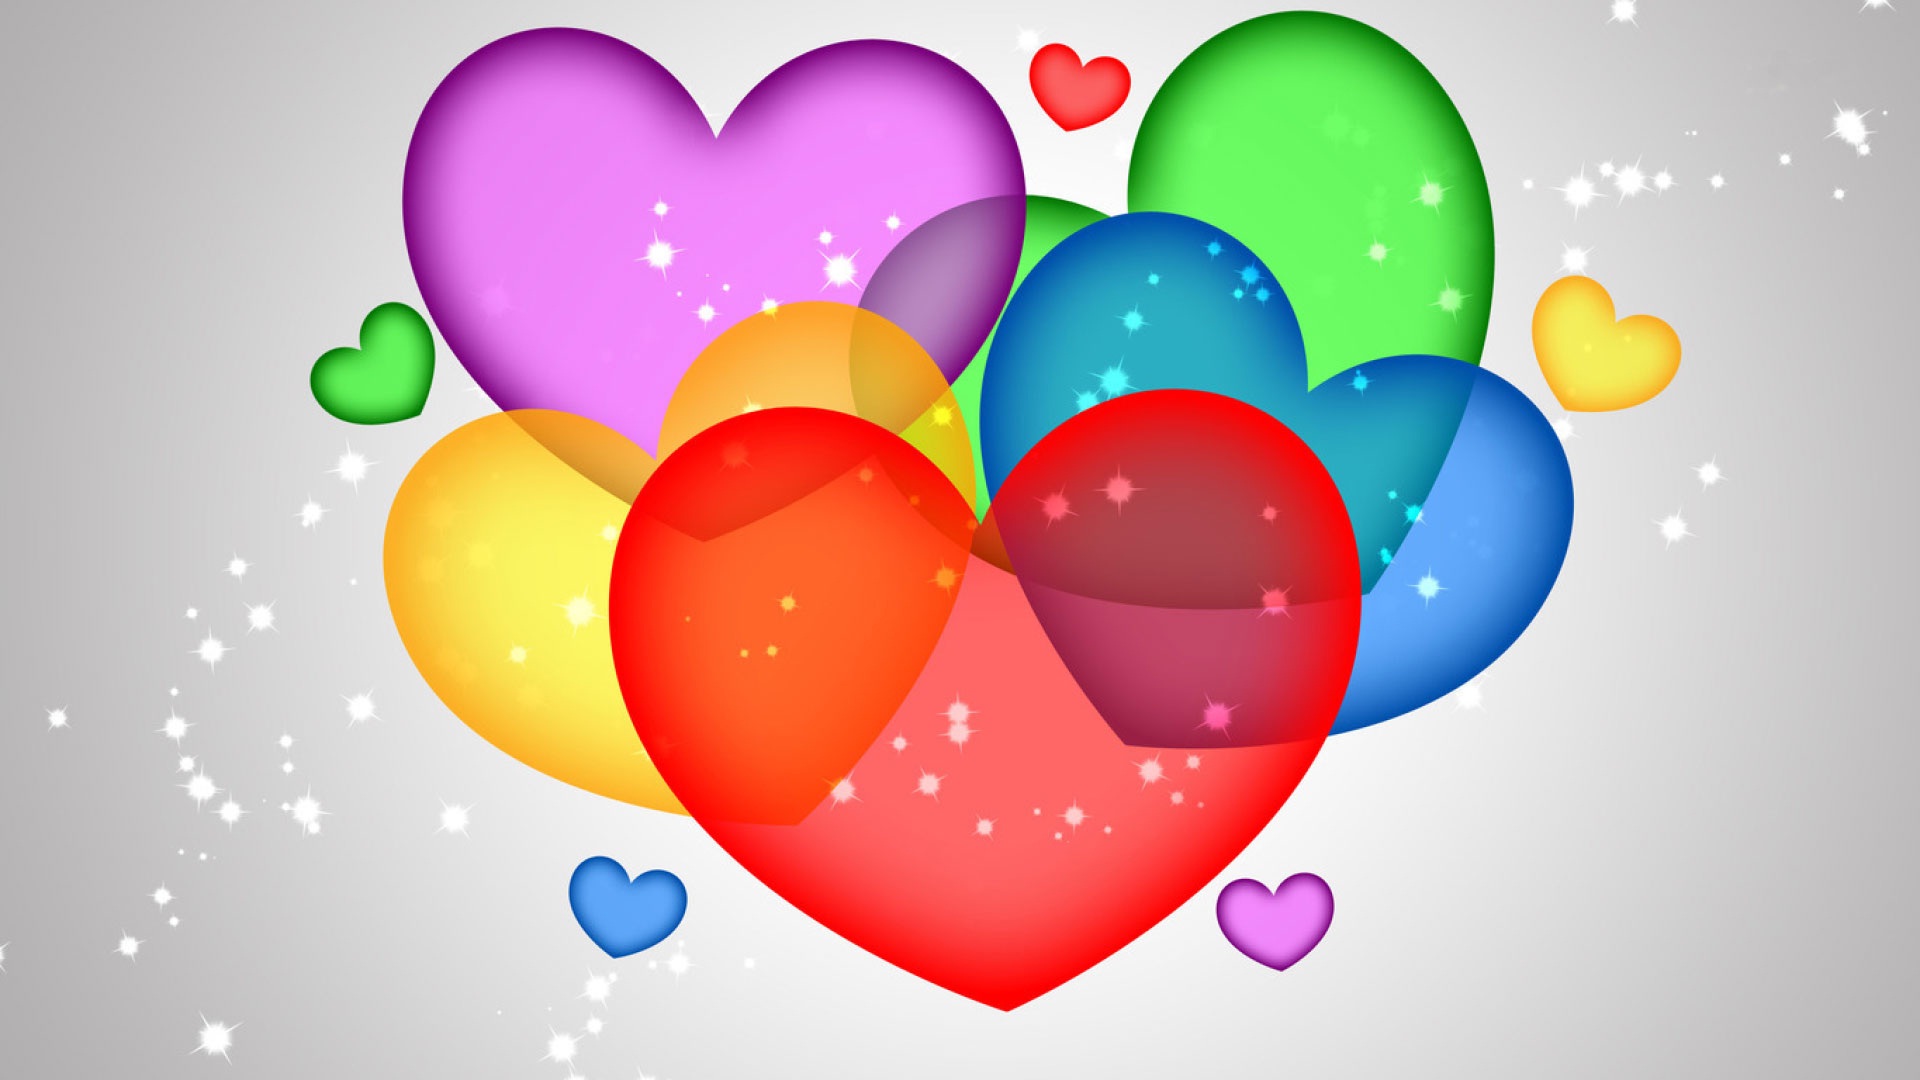 Download Free Mobile Phone Wallpaper Colorful Hearts  611  MobileSMSPKnet